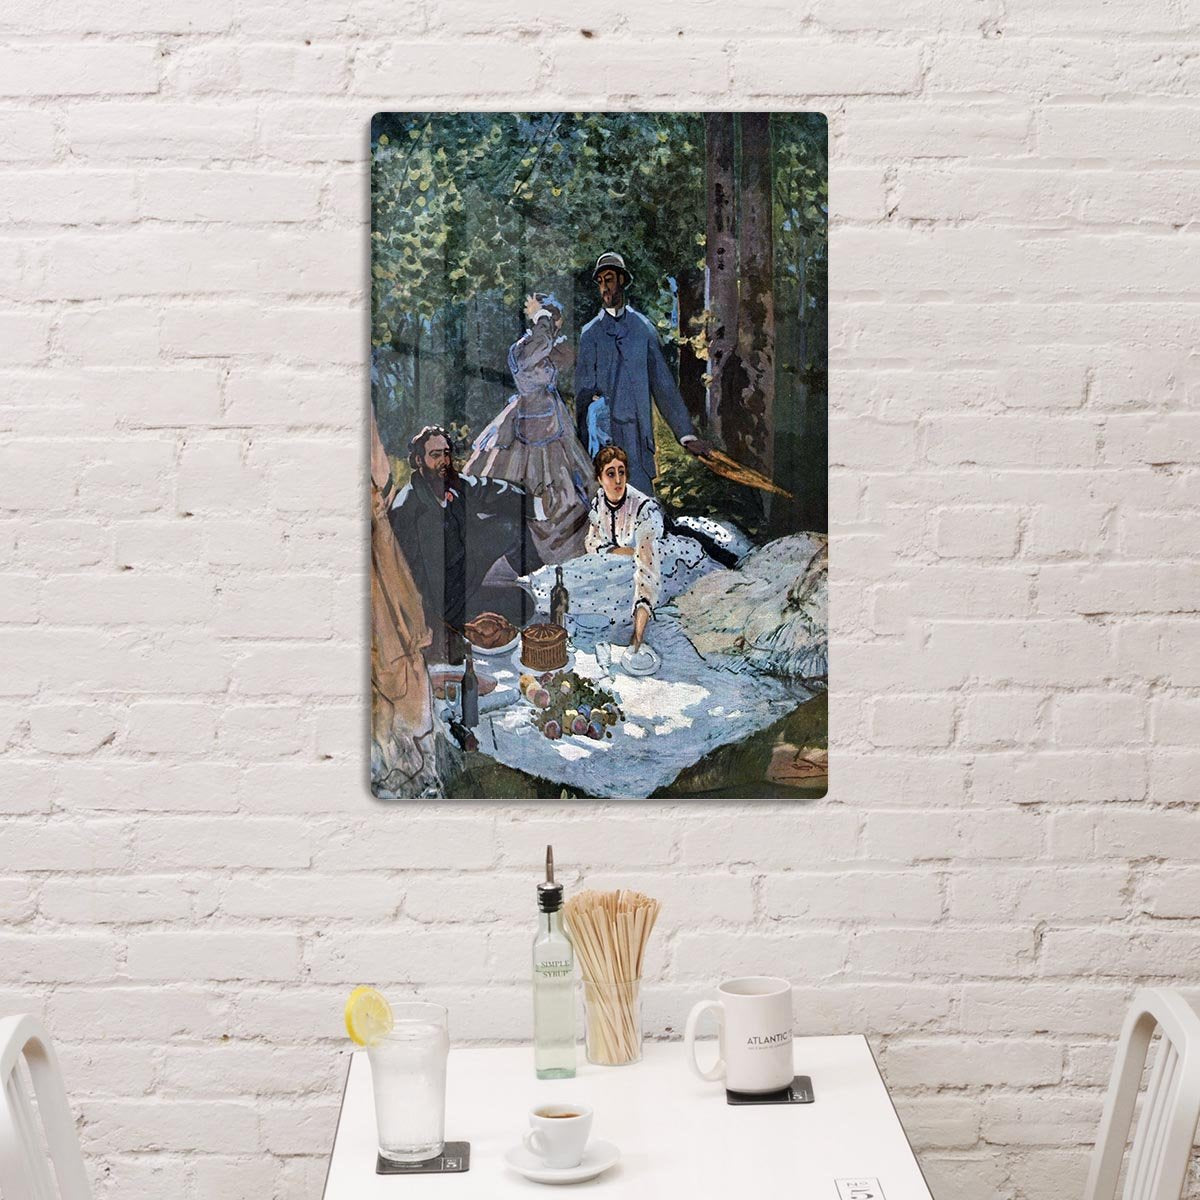 The breakfast outdoors central section by Monet HD Metal Print